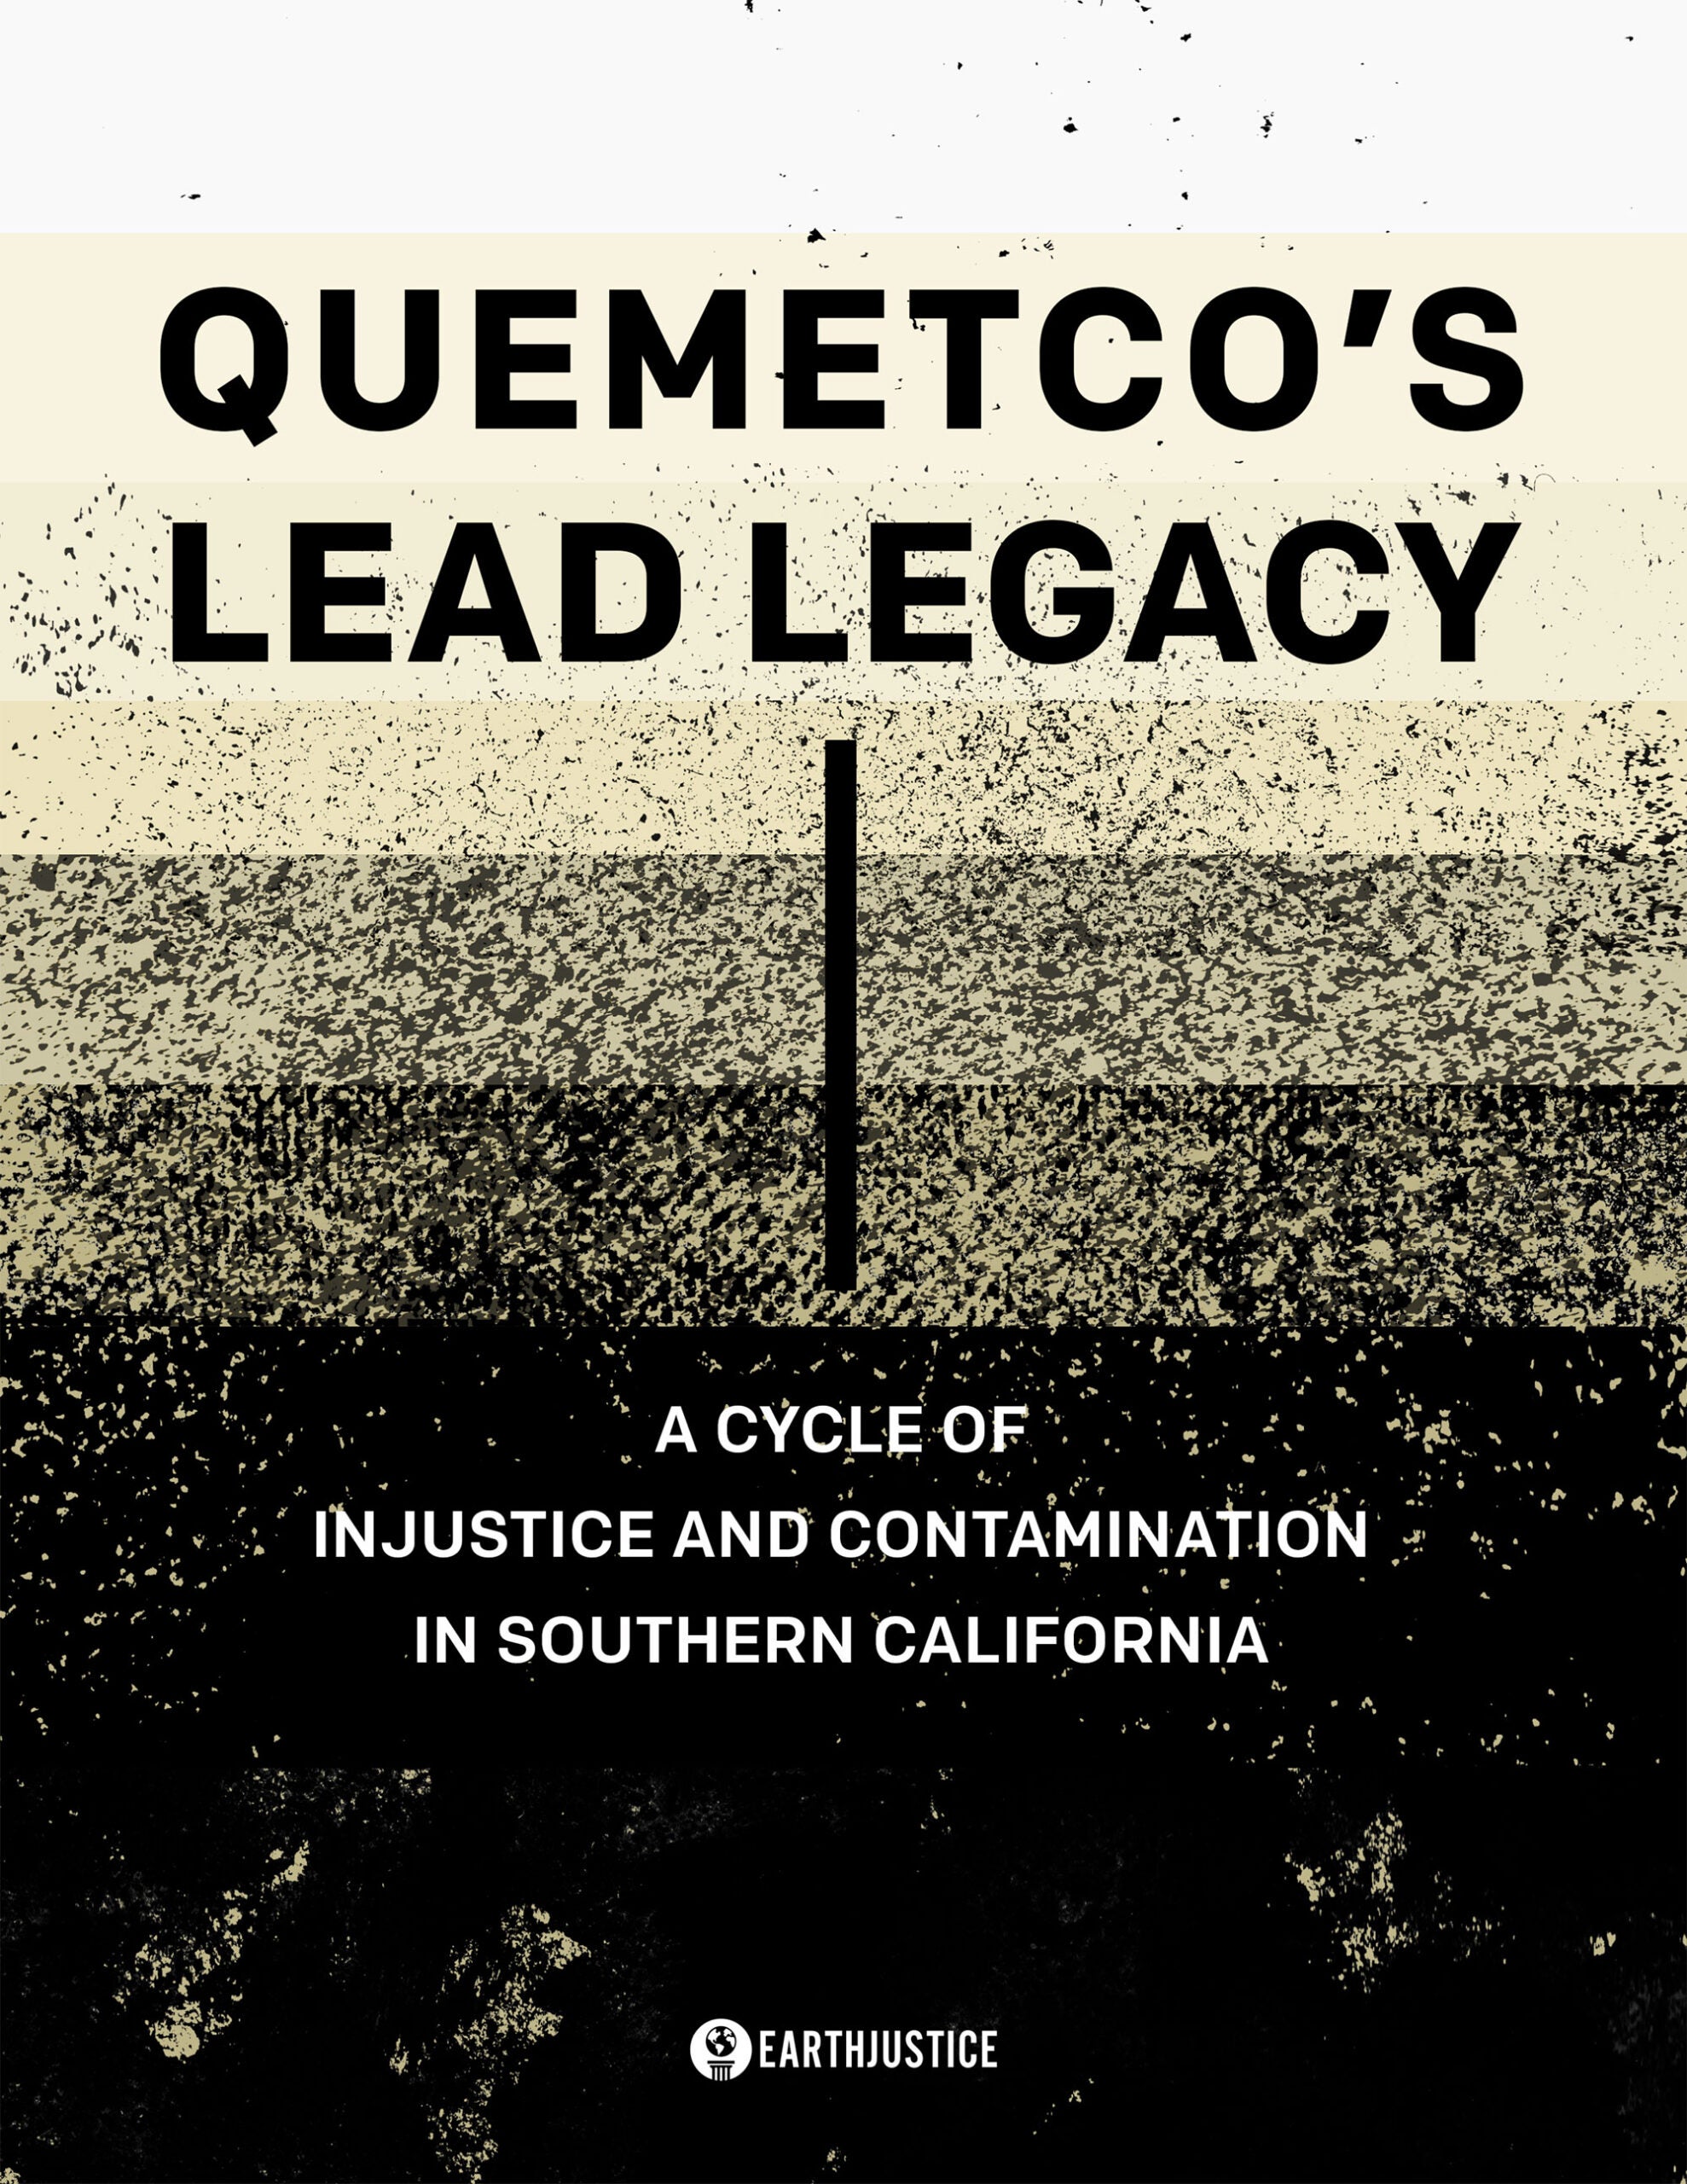 Cover of the report, "Quemetco’s Lead Legacy: A Cycle of Injustice and Contamination in Southern California."